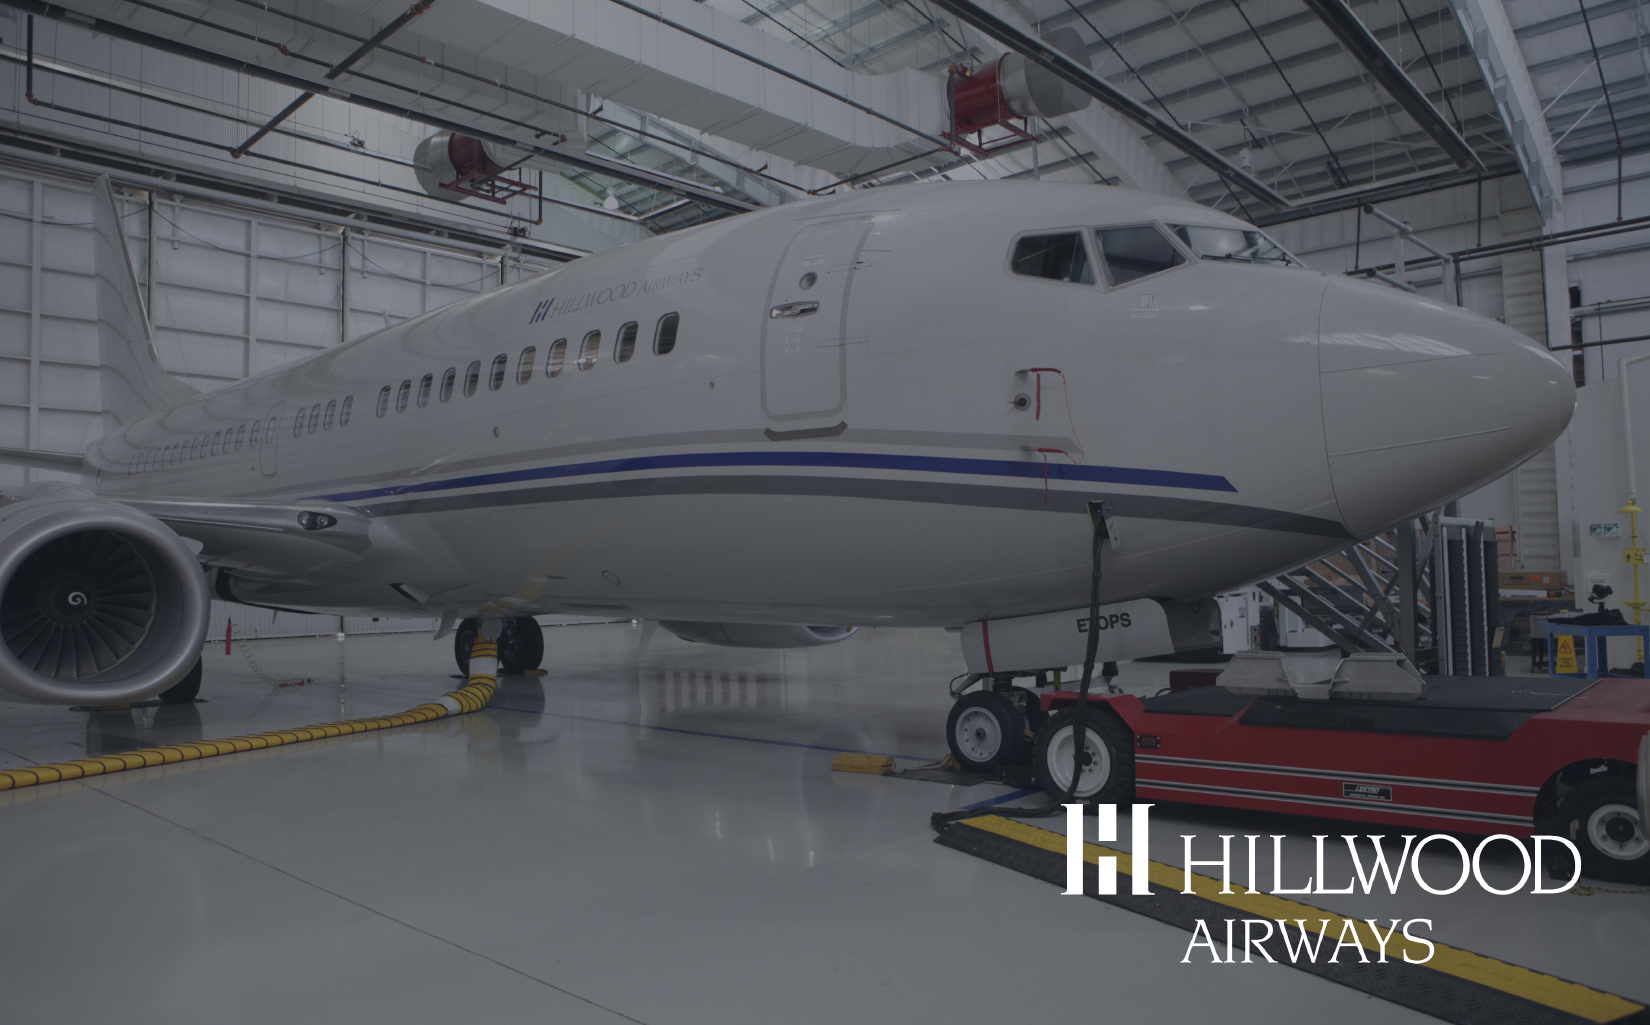 Case Study: Hillwood Airways – Setting the Foundation for Success